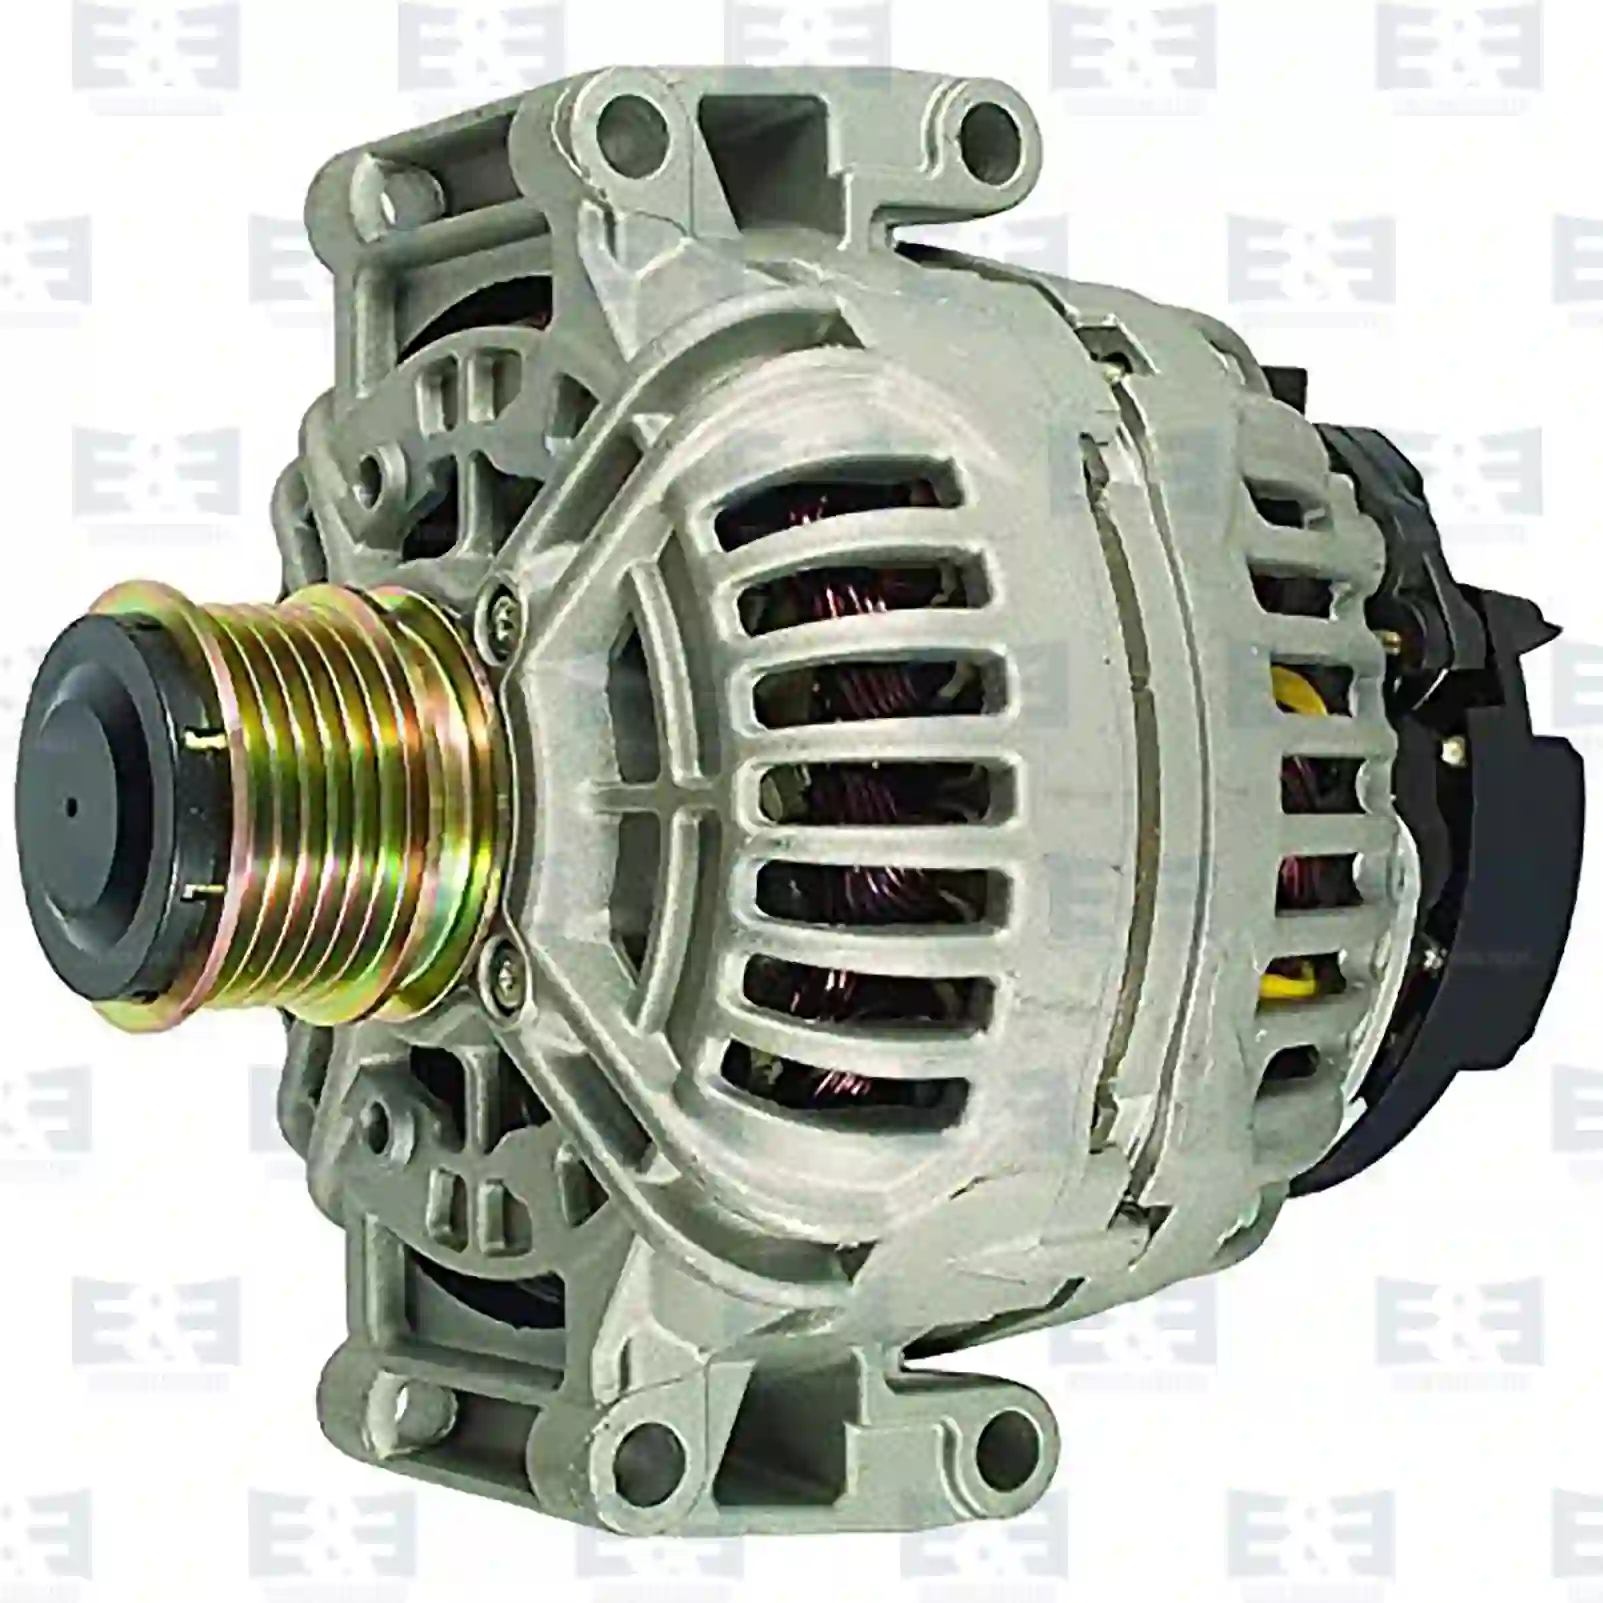 Alternator, without pulley, 2E2299518, 5103886AA, 5134204AA, 5134204AB, 0101545902, 0101549602, 0111540902, 0121542402, 0121545402, 0131541502, 0101545902, 0101549602, 0121545402 ||  2E2299518 E&E Truck Spare Parts | Truck Spare Parts, Auotomotive Spare Parts Alternator, without pulley, 2E2299518, 5103886AA, 5134204AA, 5134204AB, 0101545902, 0101549602, 0111540902, 0121542402, 0121545402, 0131541502, 0101545902, 0101549602, 0121545402 ||  2E2299518 E&E Truck Spare Parts | Truck Spare Parts, Auotomotive Spare Parts